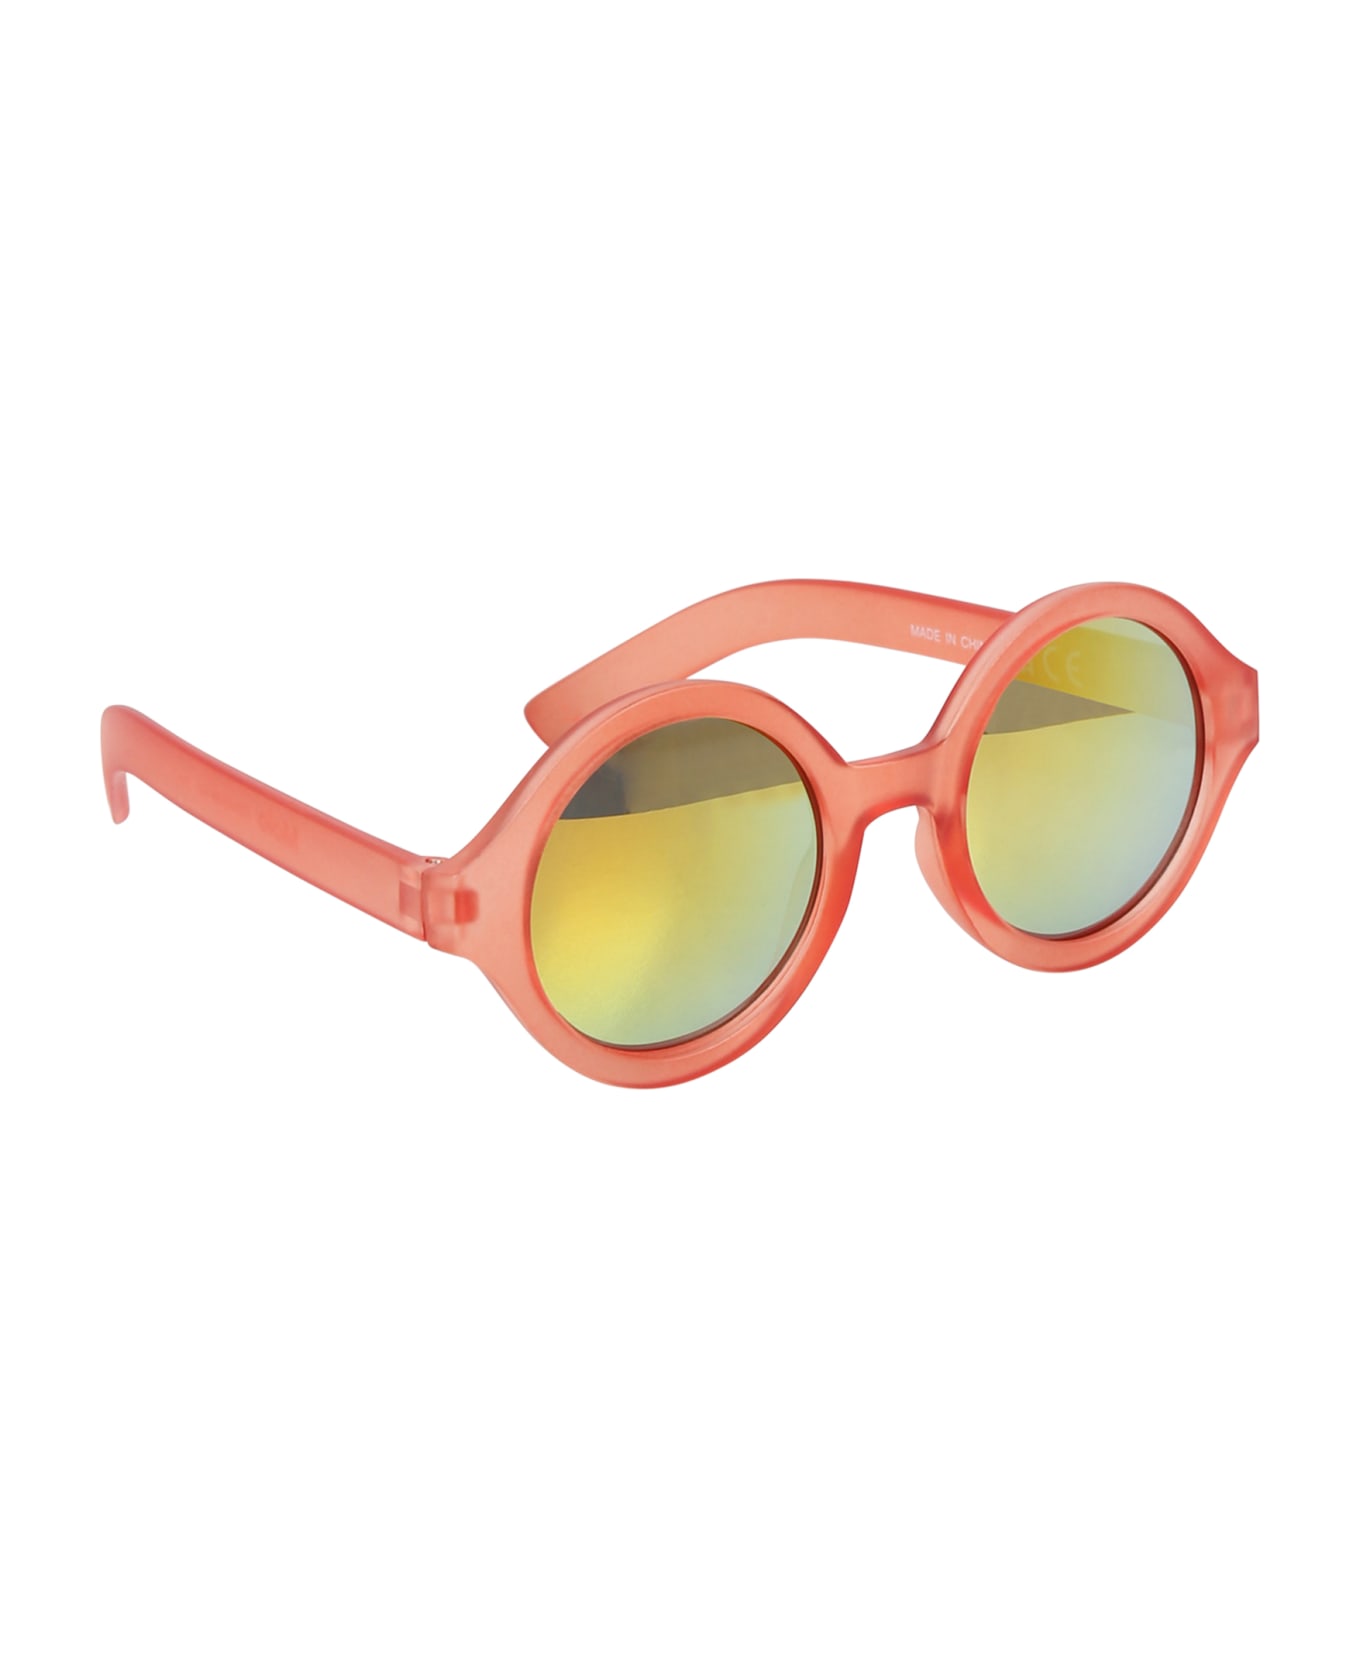 Molo Red Shelby Sunglasses For Girl - Fuchsia アクセサリー＆ギフト